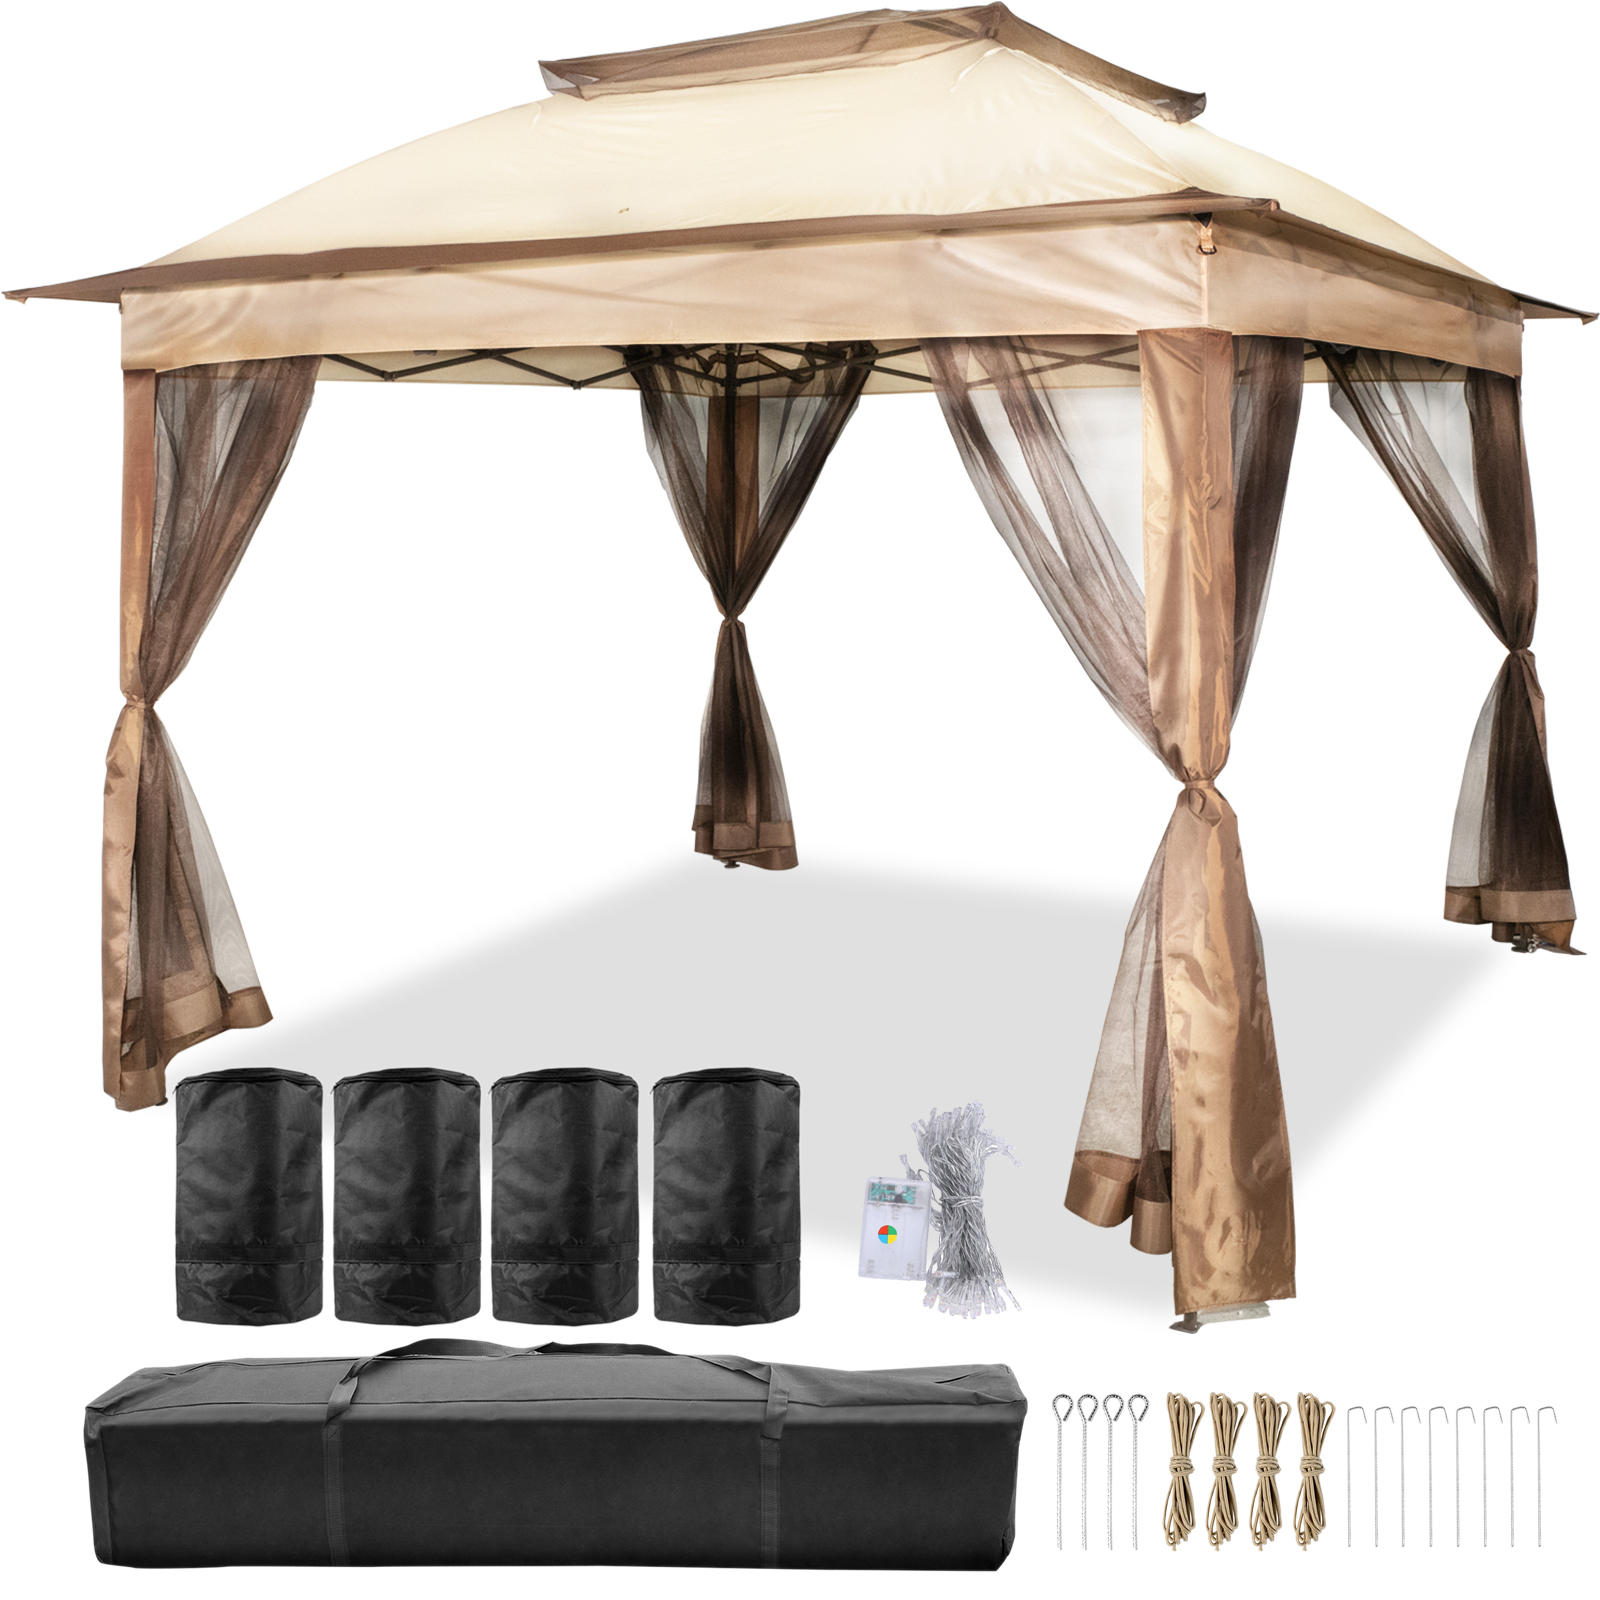 Patio Gazebo Canopy10.8x10.8ft Outdoor 2tier Tent Shelter Awning Steel W/netting от Vevor Many GEOs